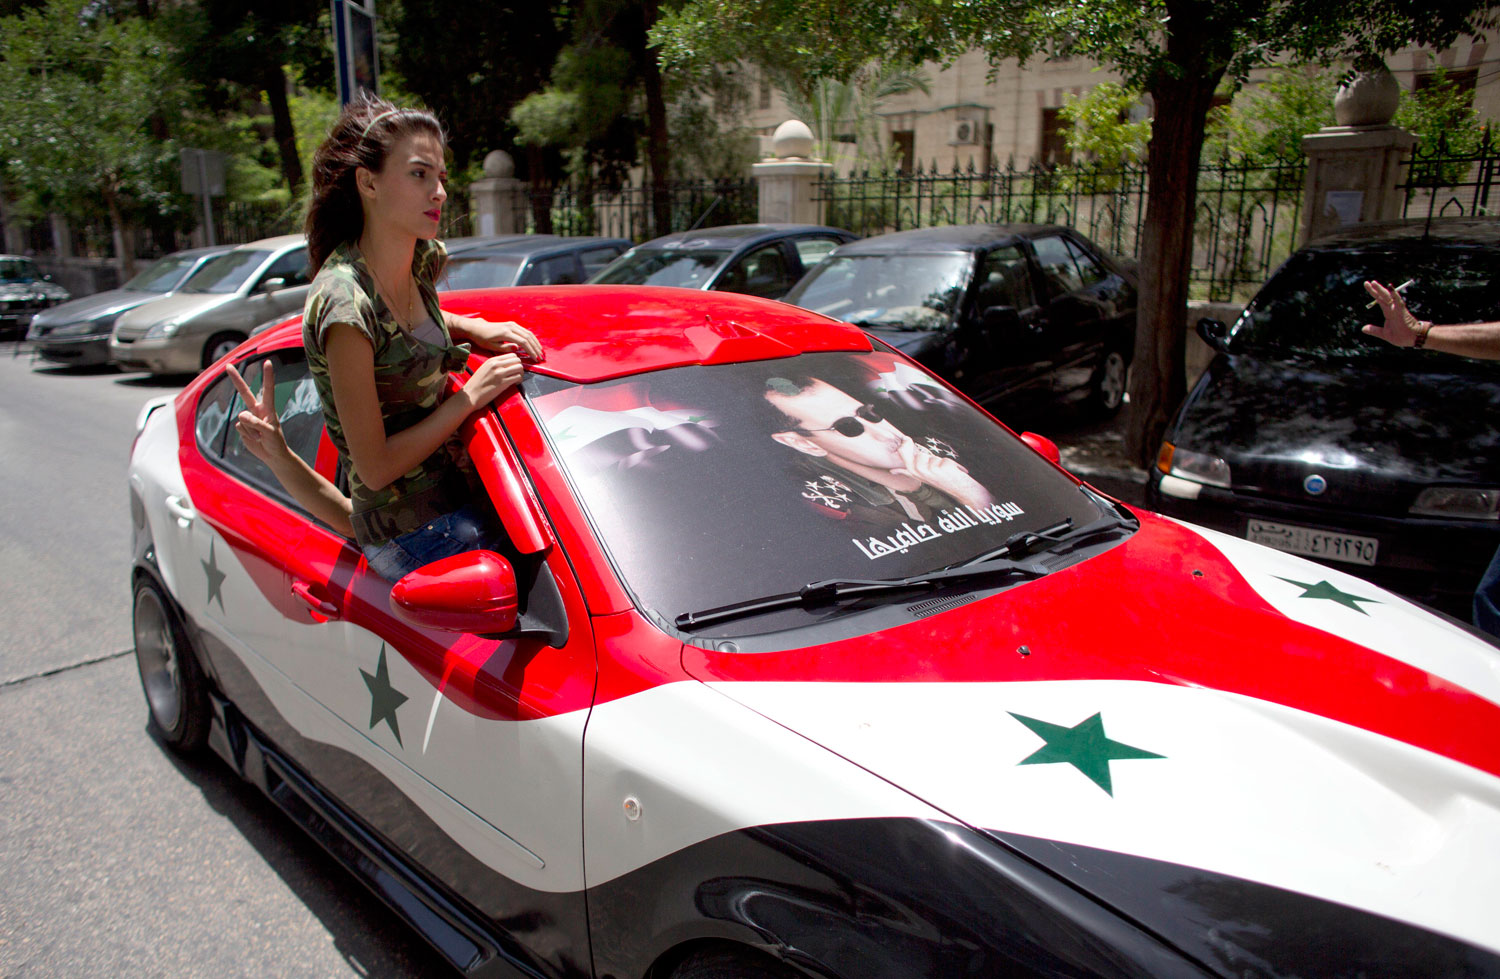 A Syrian woman rides in a car painted in the colors of the Syrian flag with President Bashar Assad's portrait in Damascus on June 3, 2014.